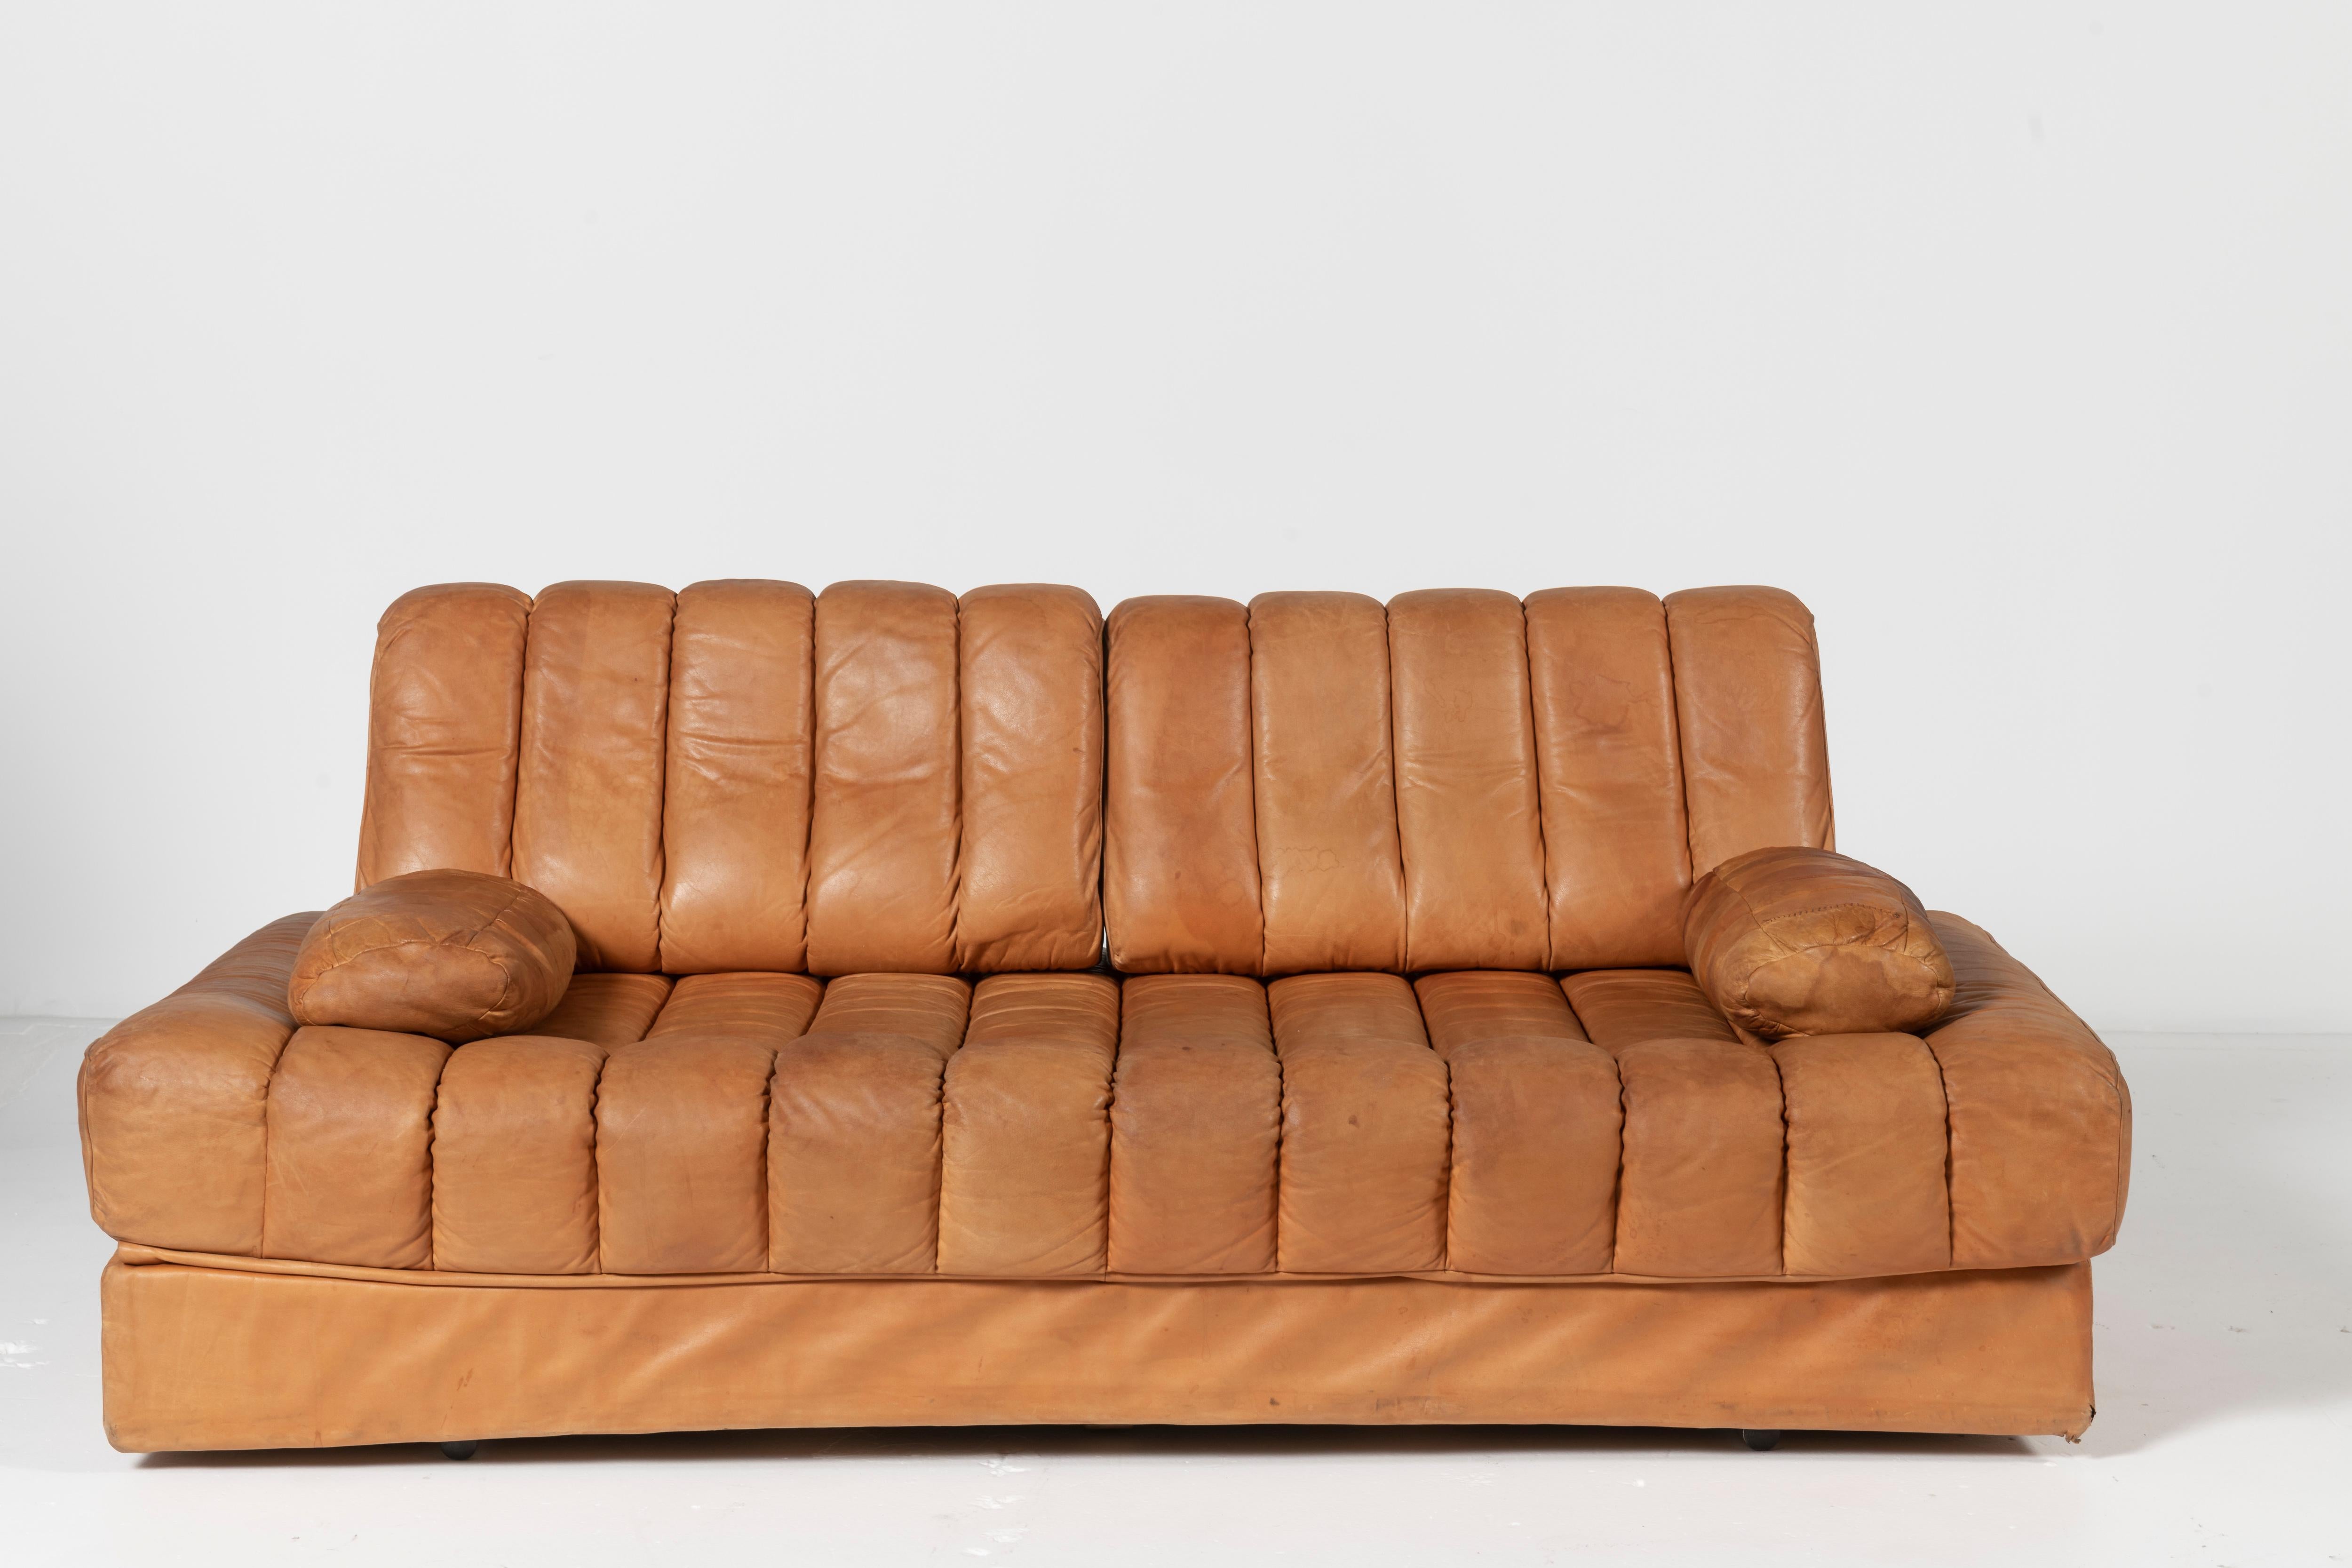 Lovely De Sede DS-85 sofa/daybed in cognac leather in great condition. The sofa also converts to both a daybed and a double-sized bed when fully open. Two pillows.